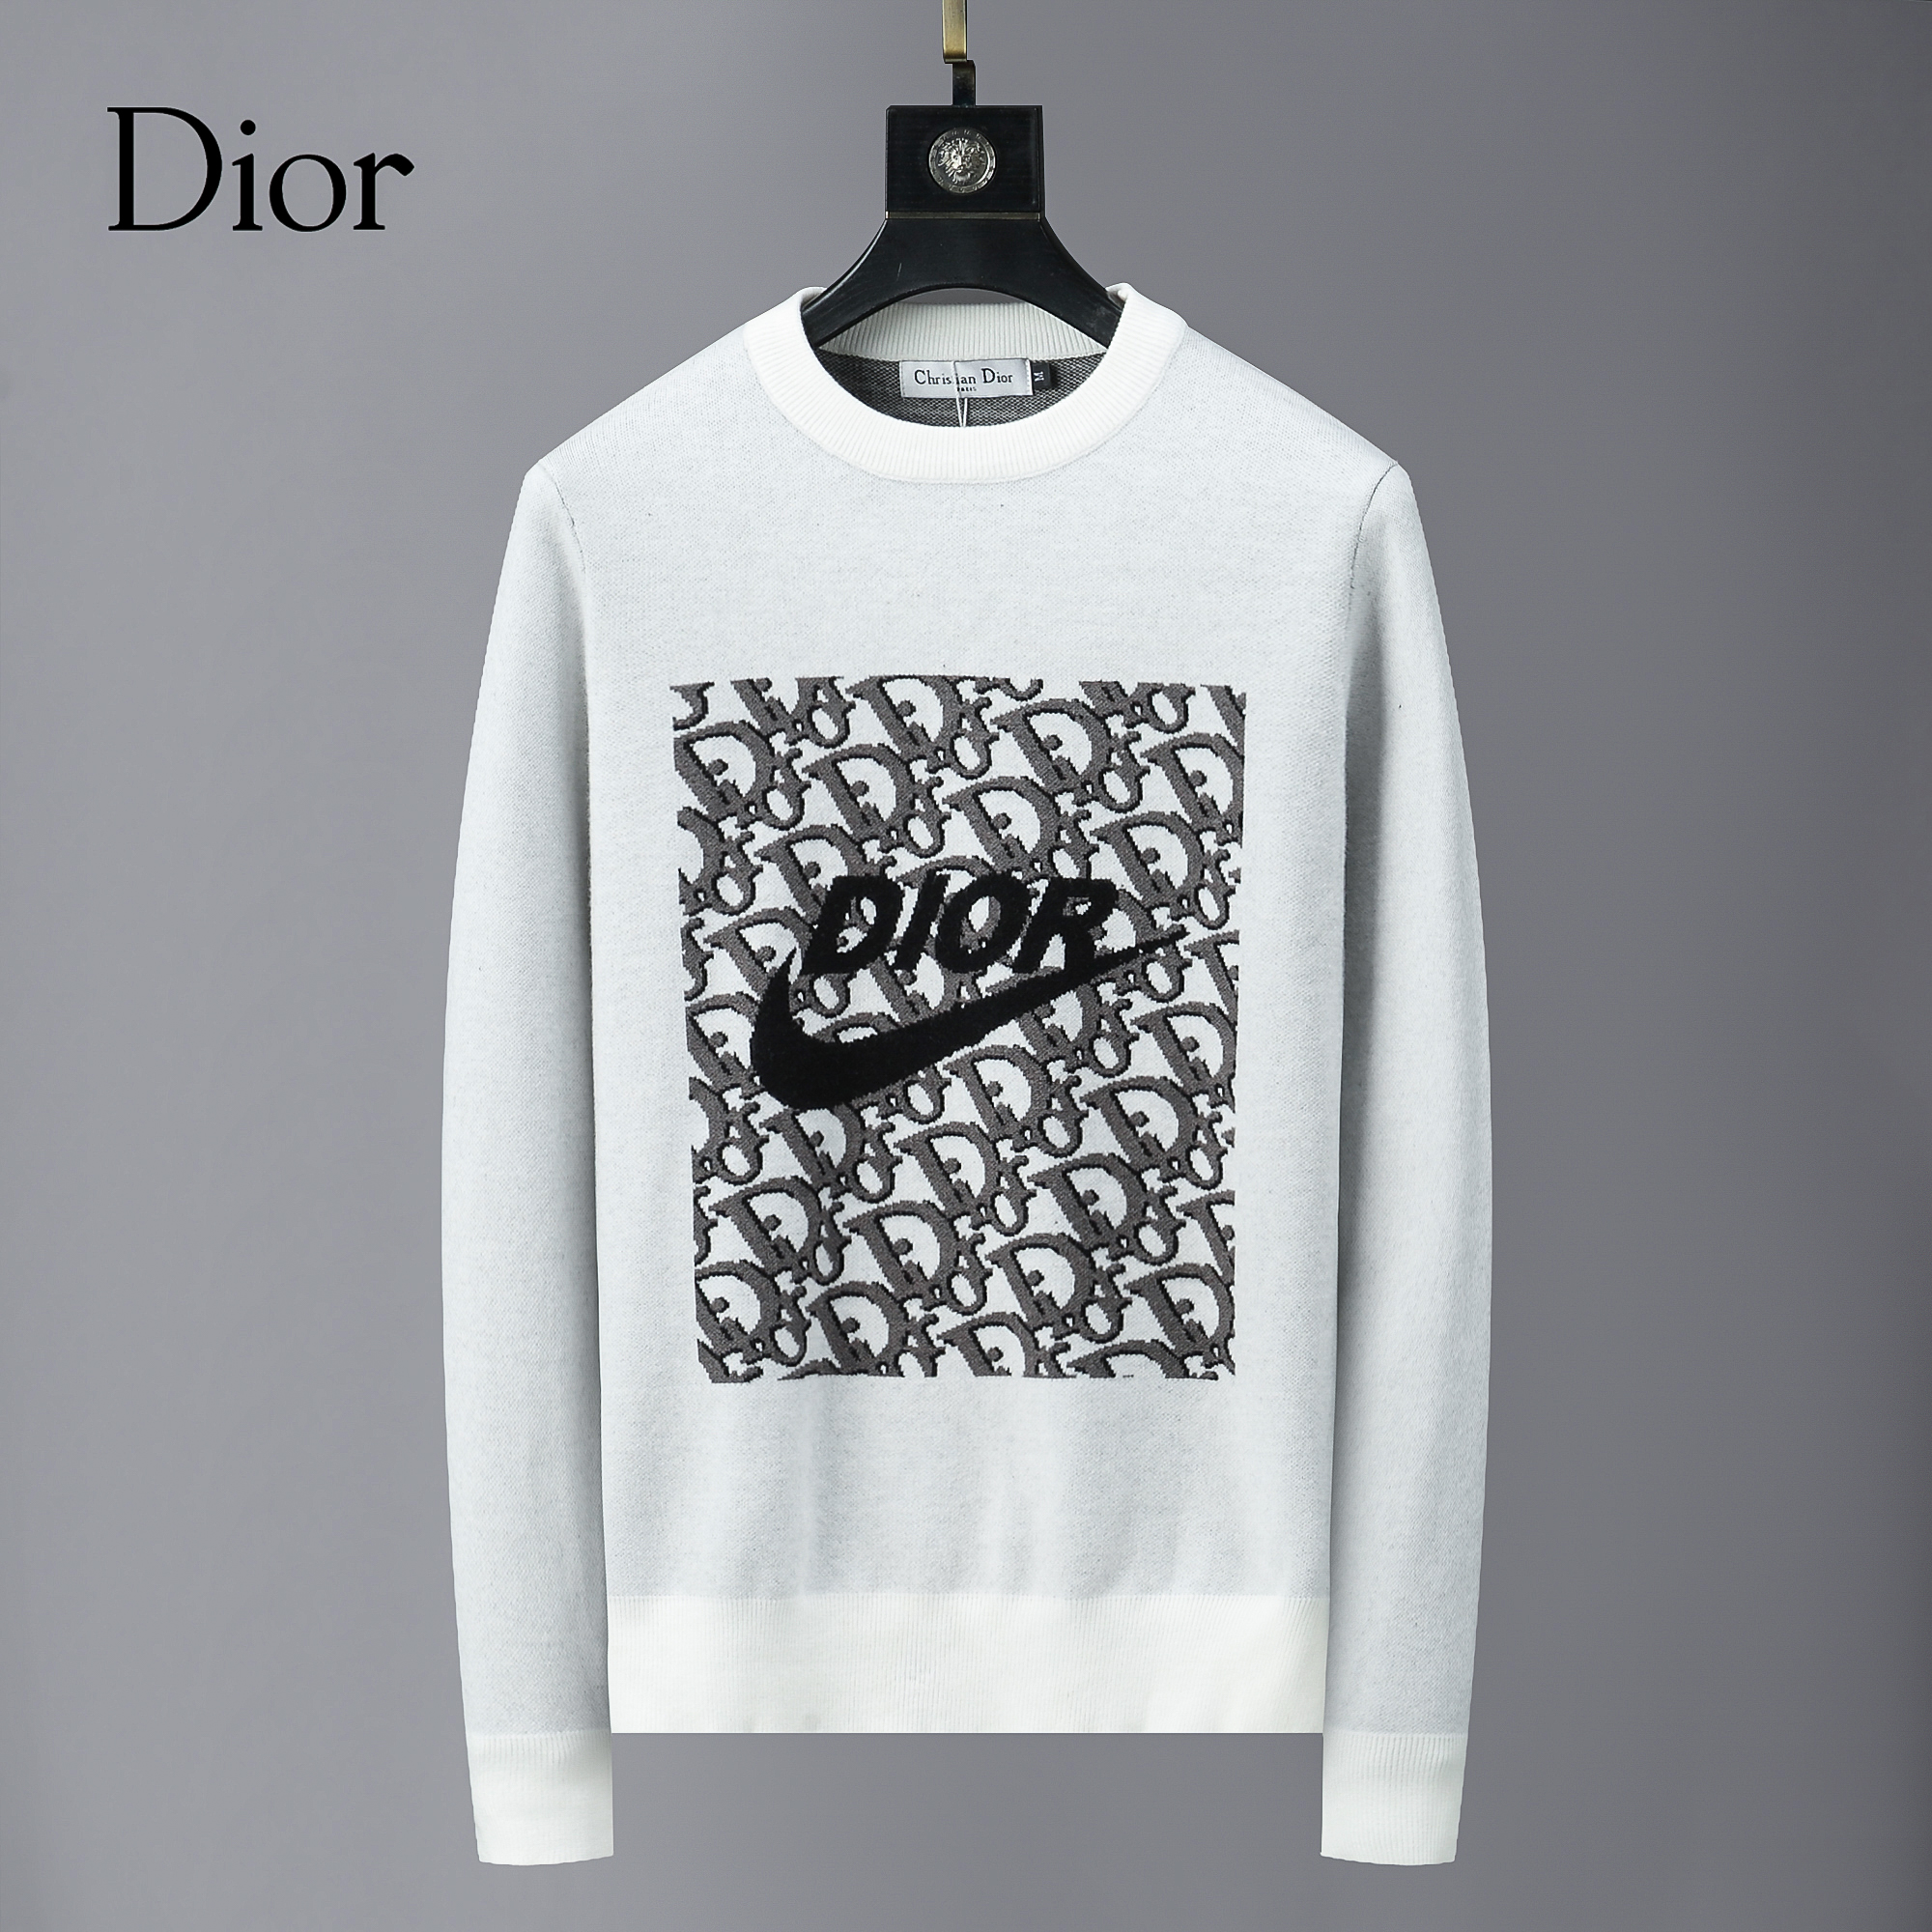 Dior Round Neck Sweater For Men in 261347, cheap Dior Sweaters, only $48!